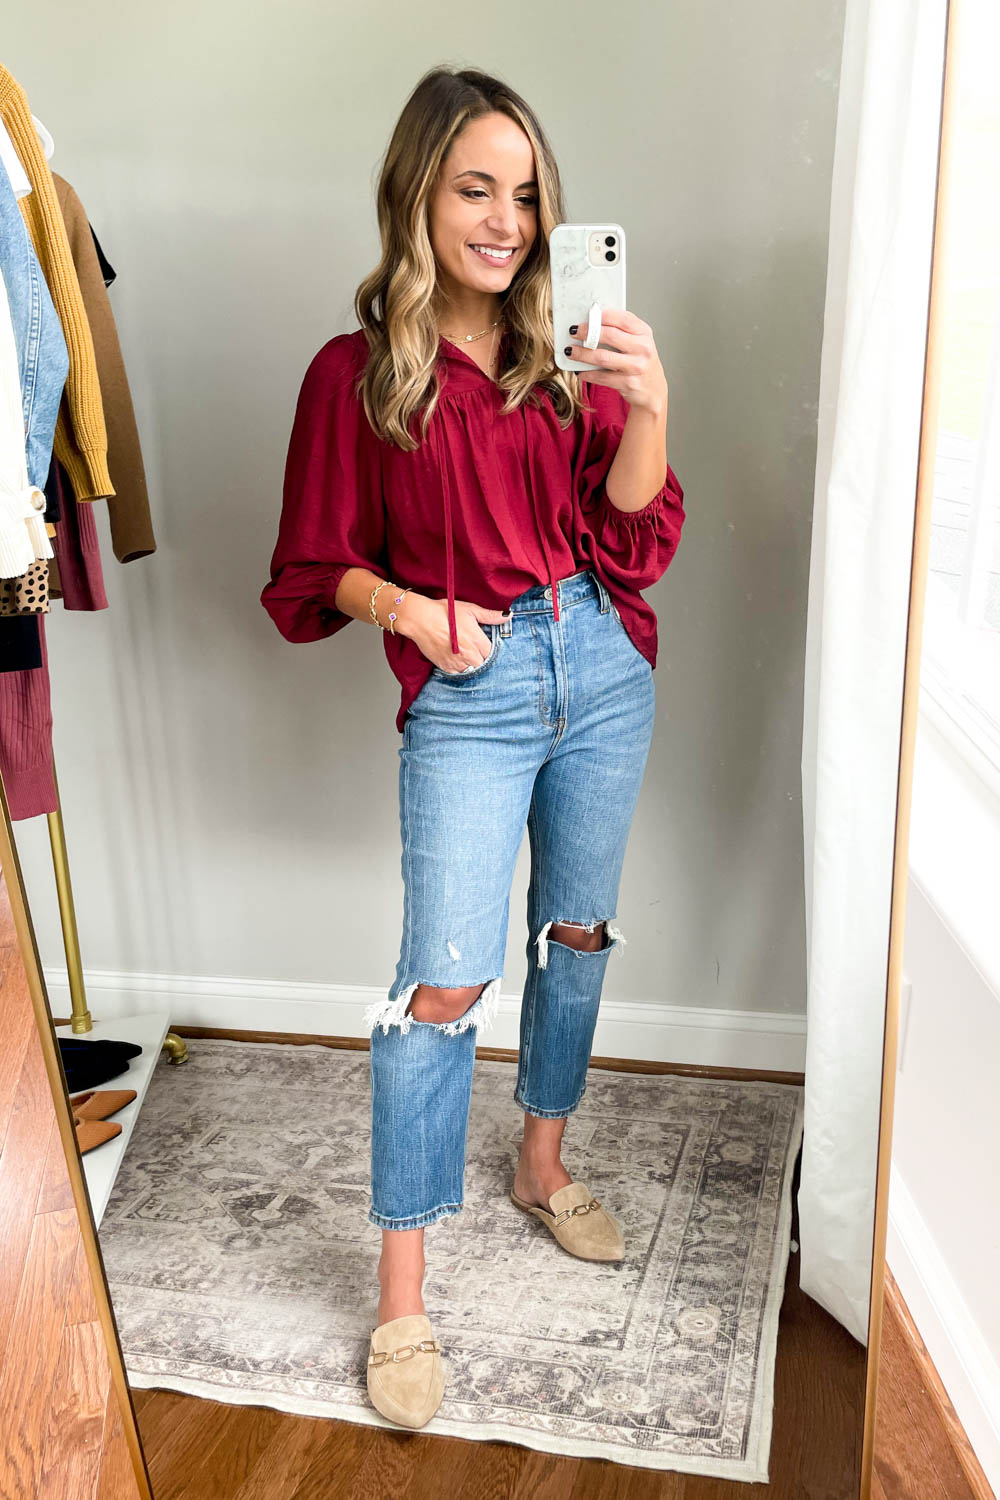 25 Stylish Ways to Wear Red  Red top outfit, Red outfit, Clothes